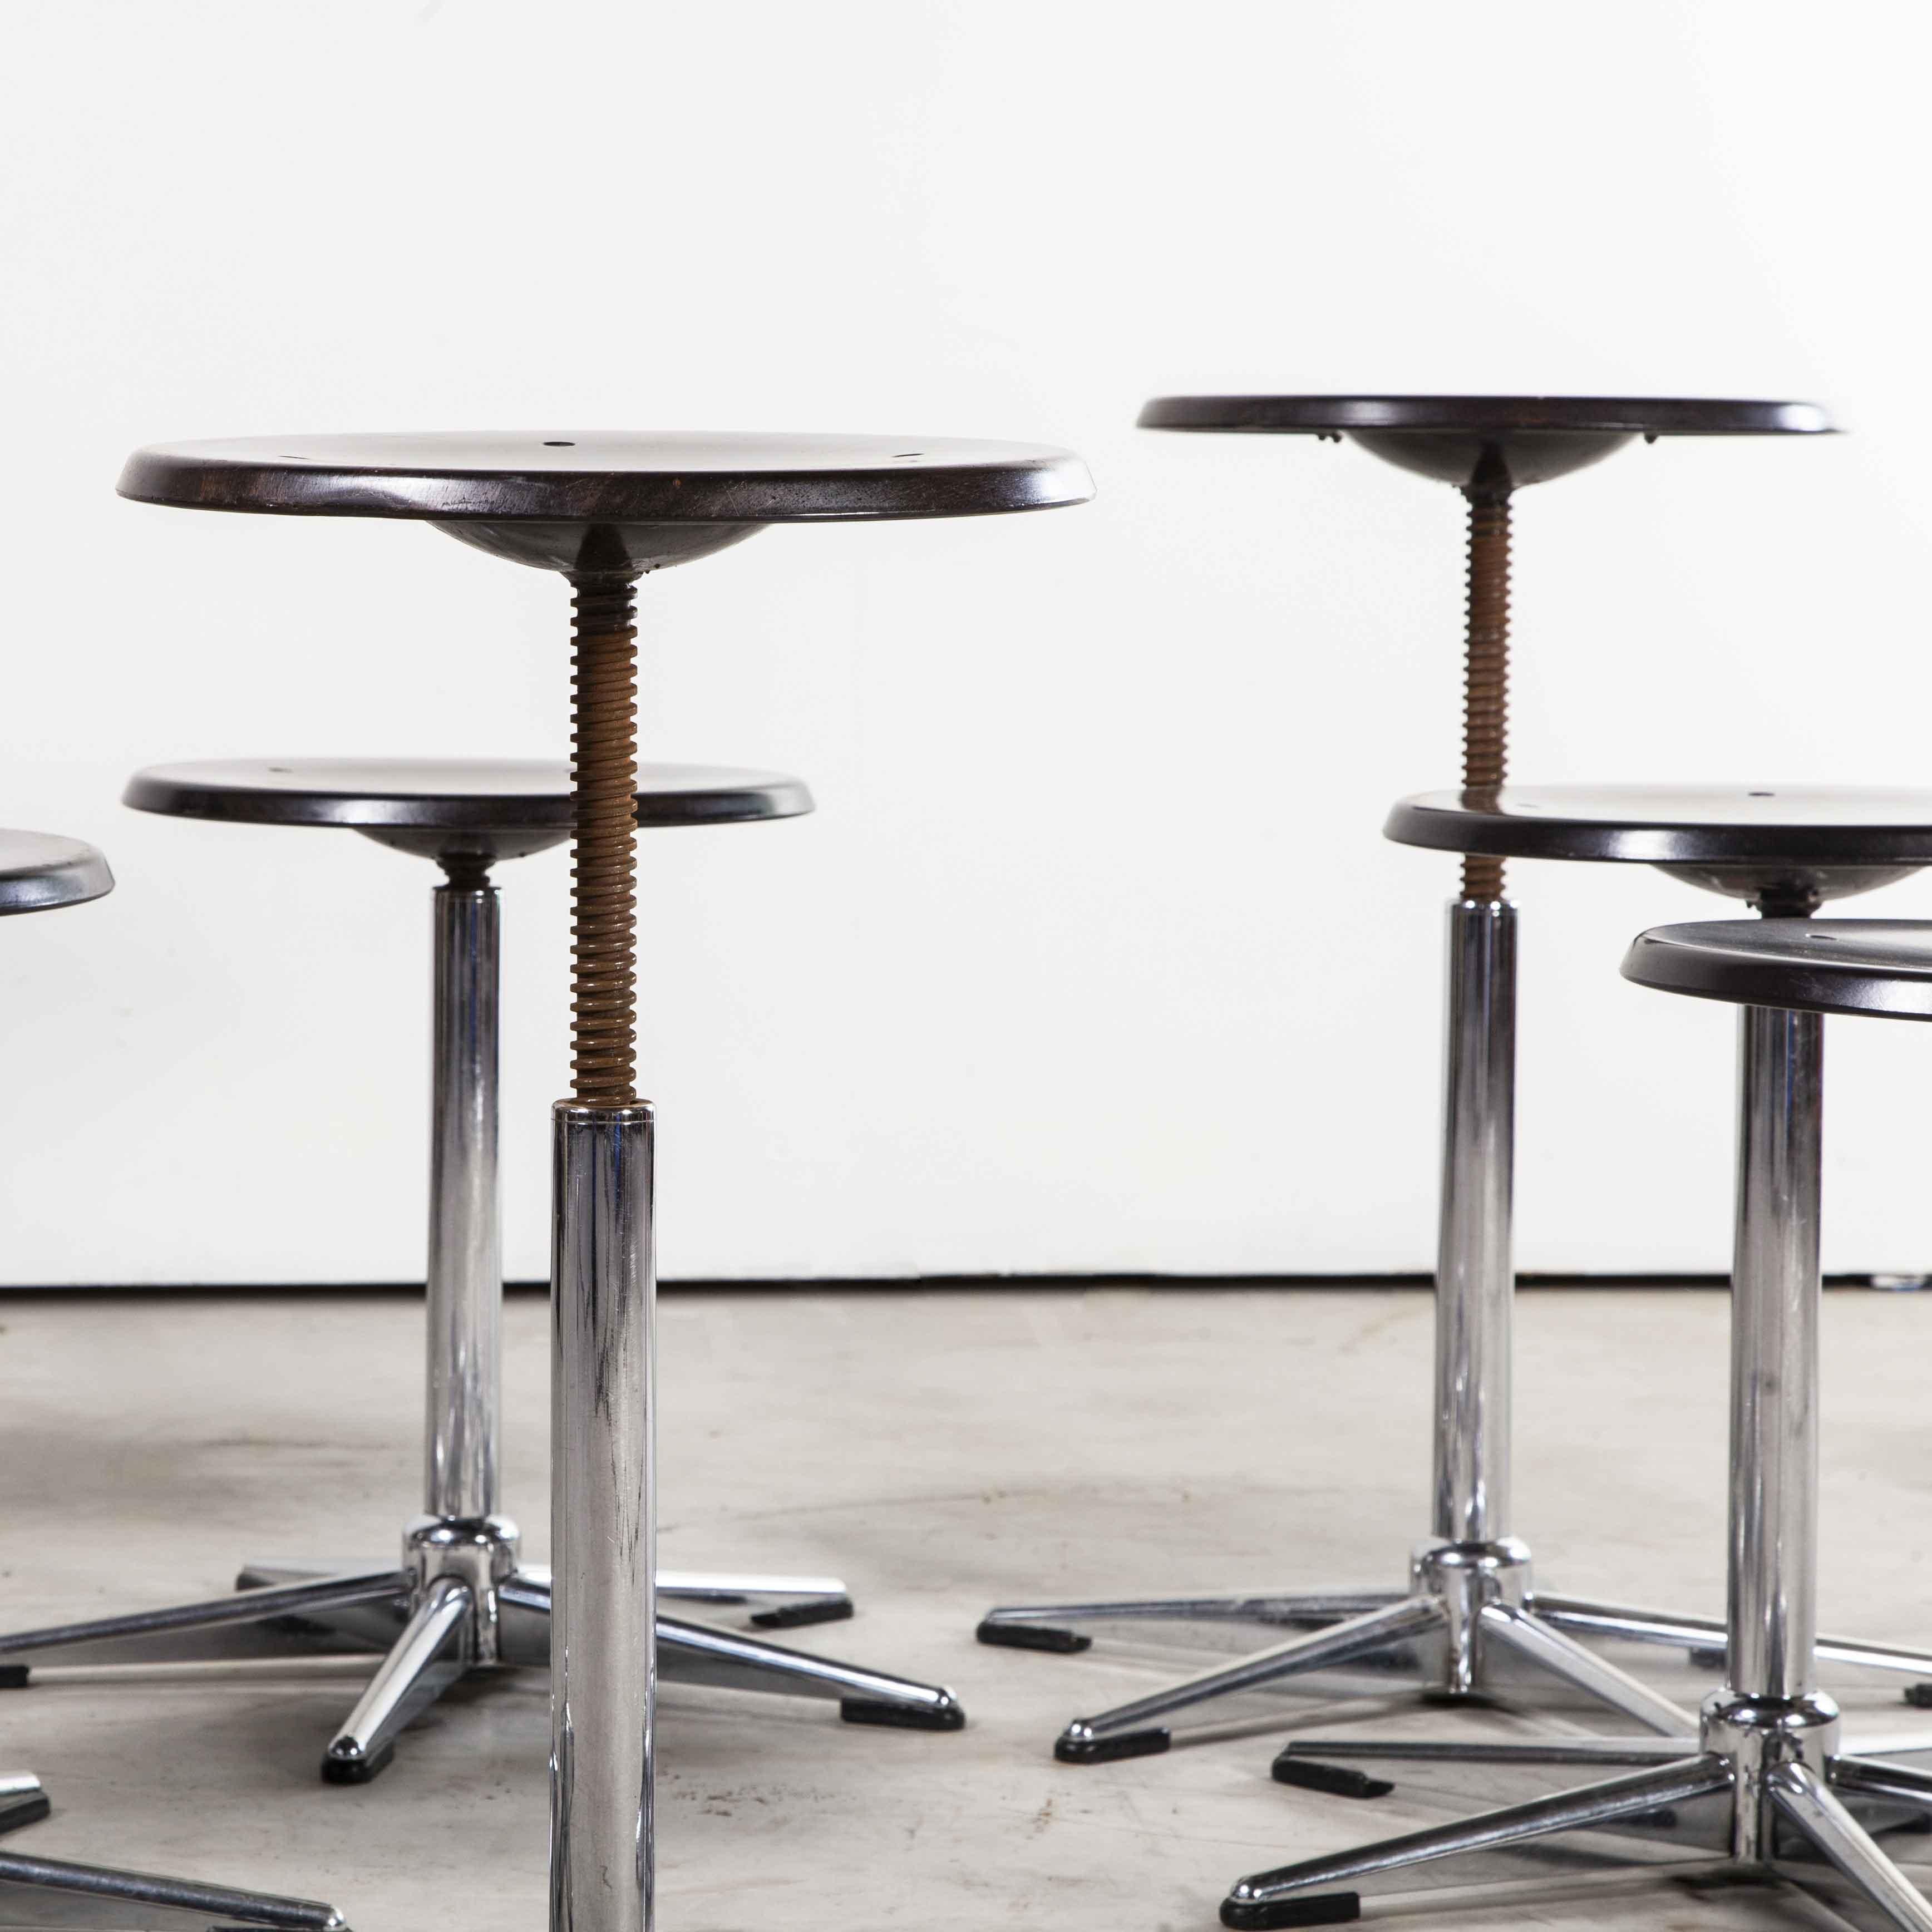 1970s chrome and dark walnut stools by Pagholz - Set of eight

1970s chrome and dark walnut stools by Pagholz - Set of four. Simple chrome stools that swivel and are thus height adjustable with a central threaded bar. The seats are made from